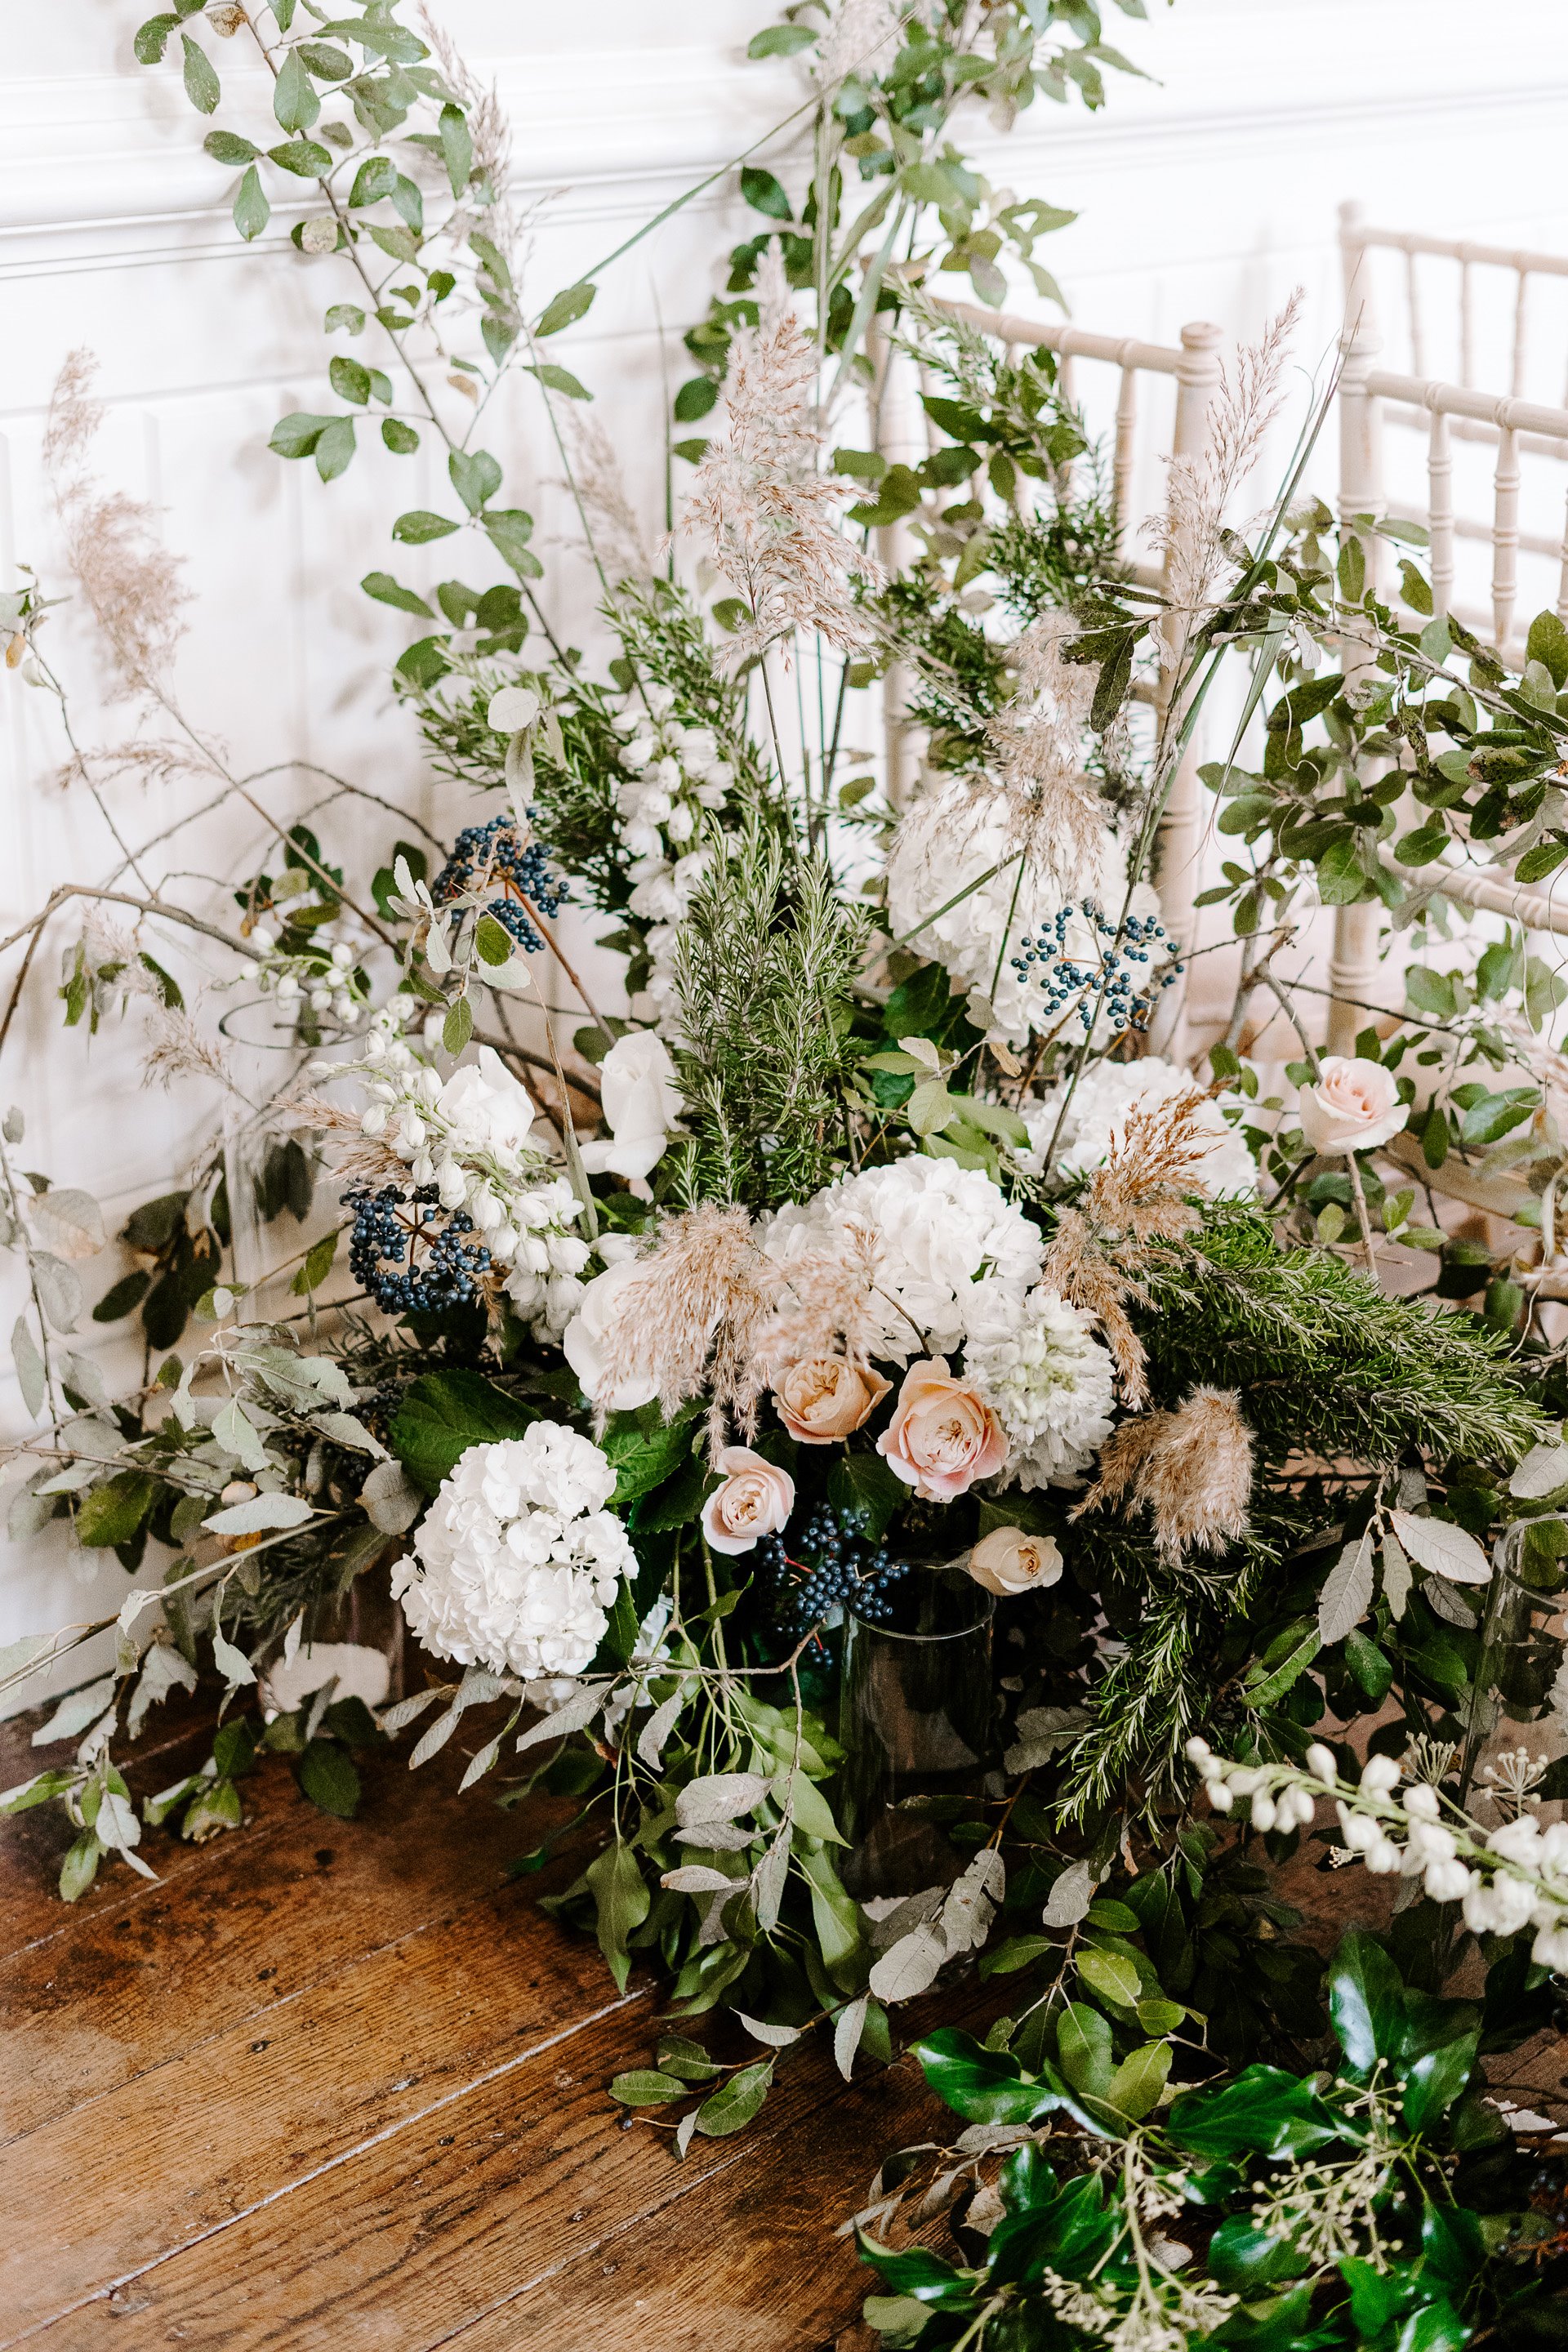 Fluffy white wedding blooms decorate the aisle of this romantic ceremony in the cotswolds